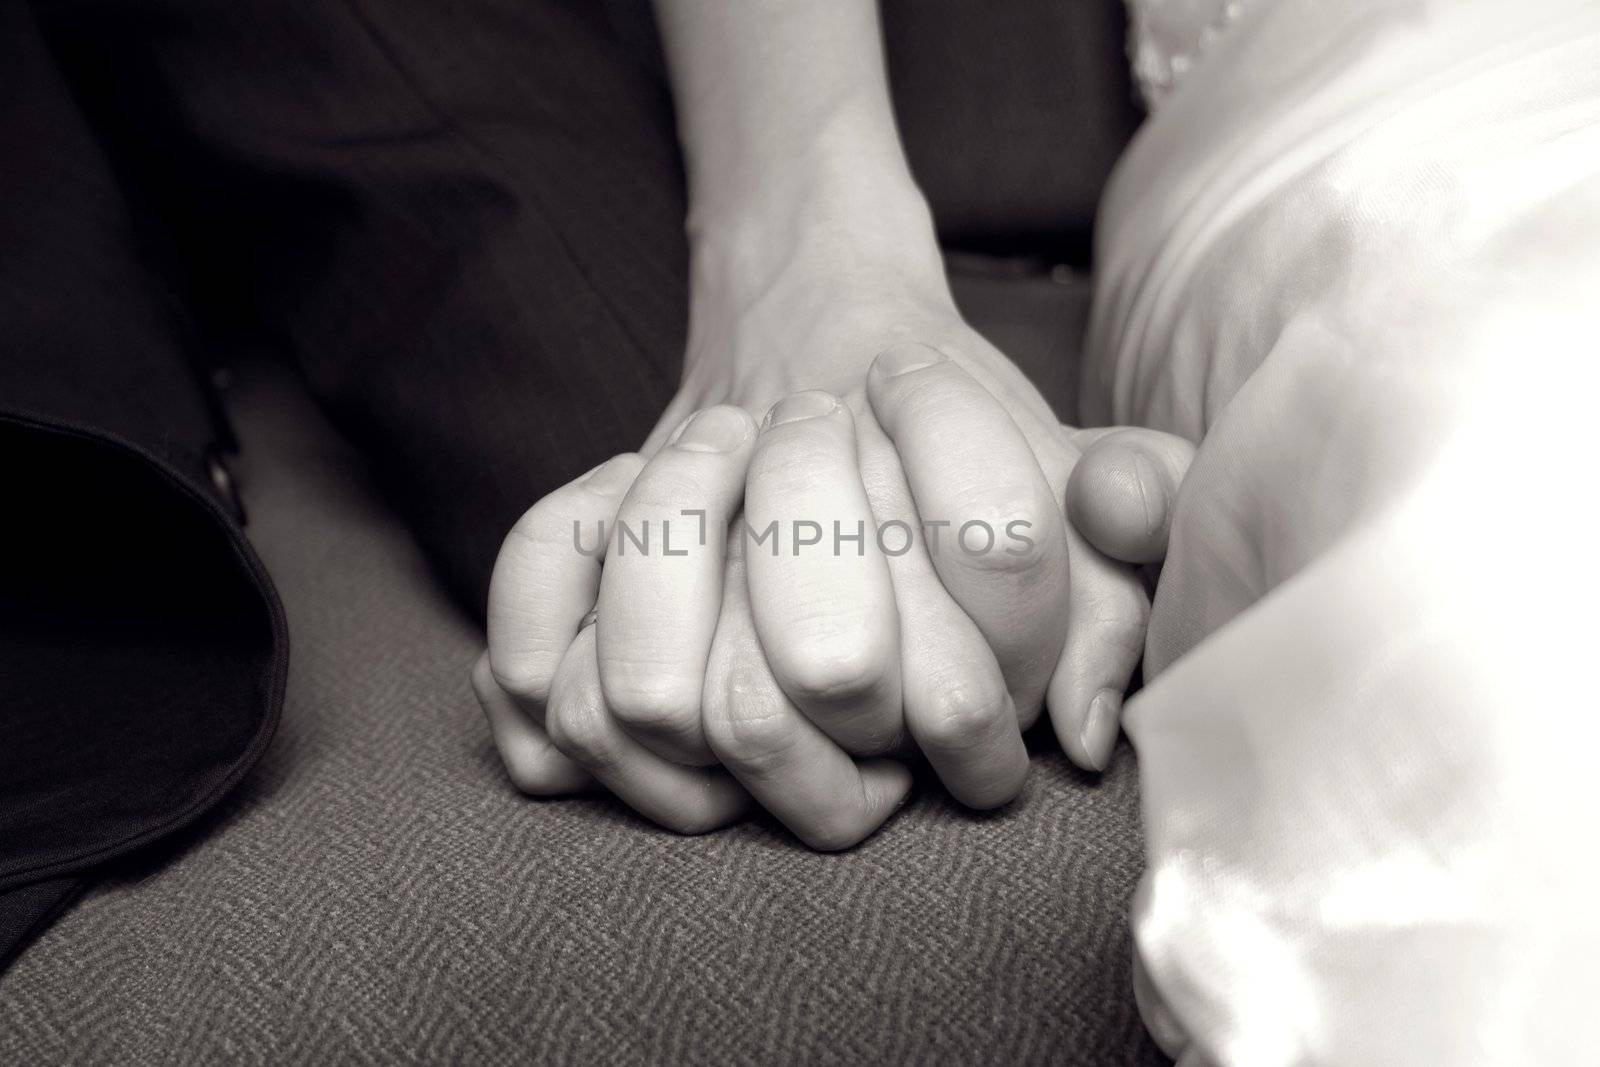 The hands of bride and groom twisted together